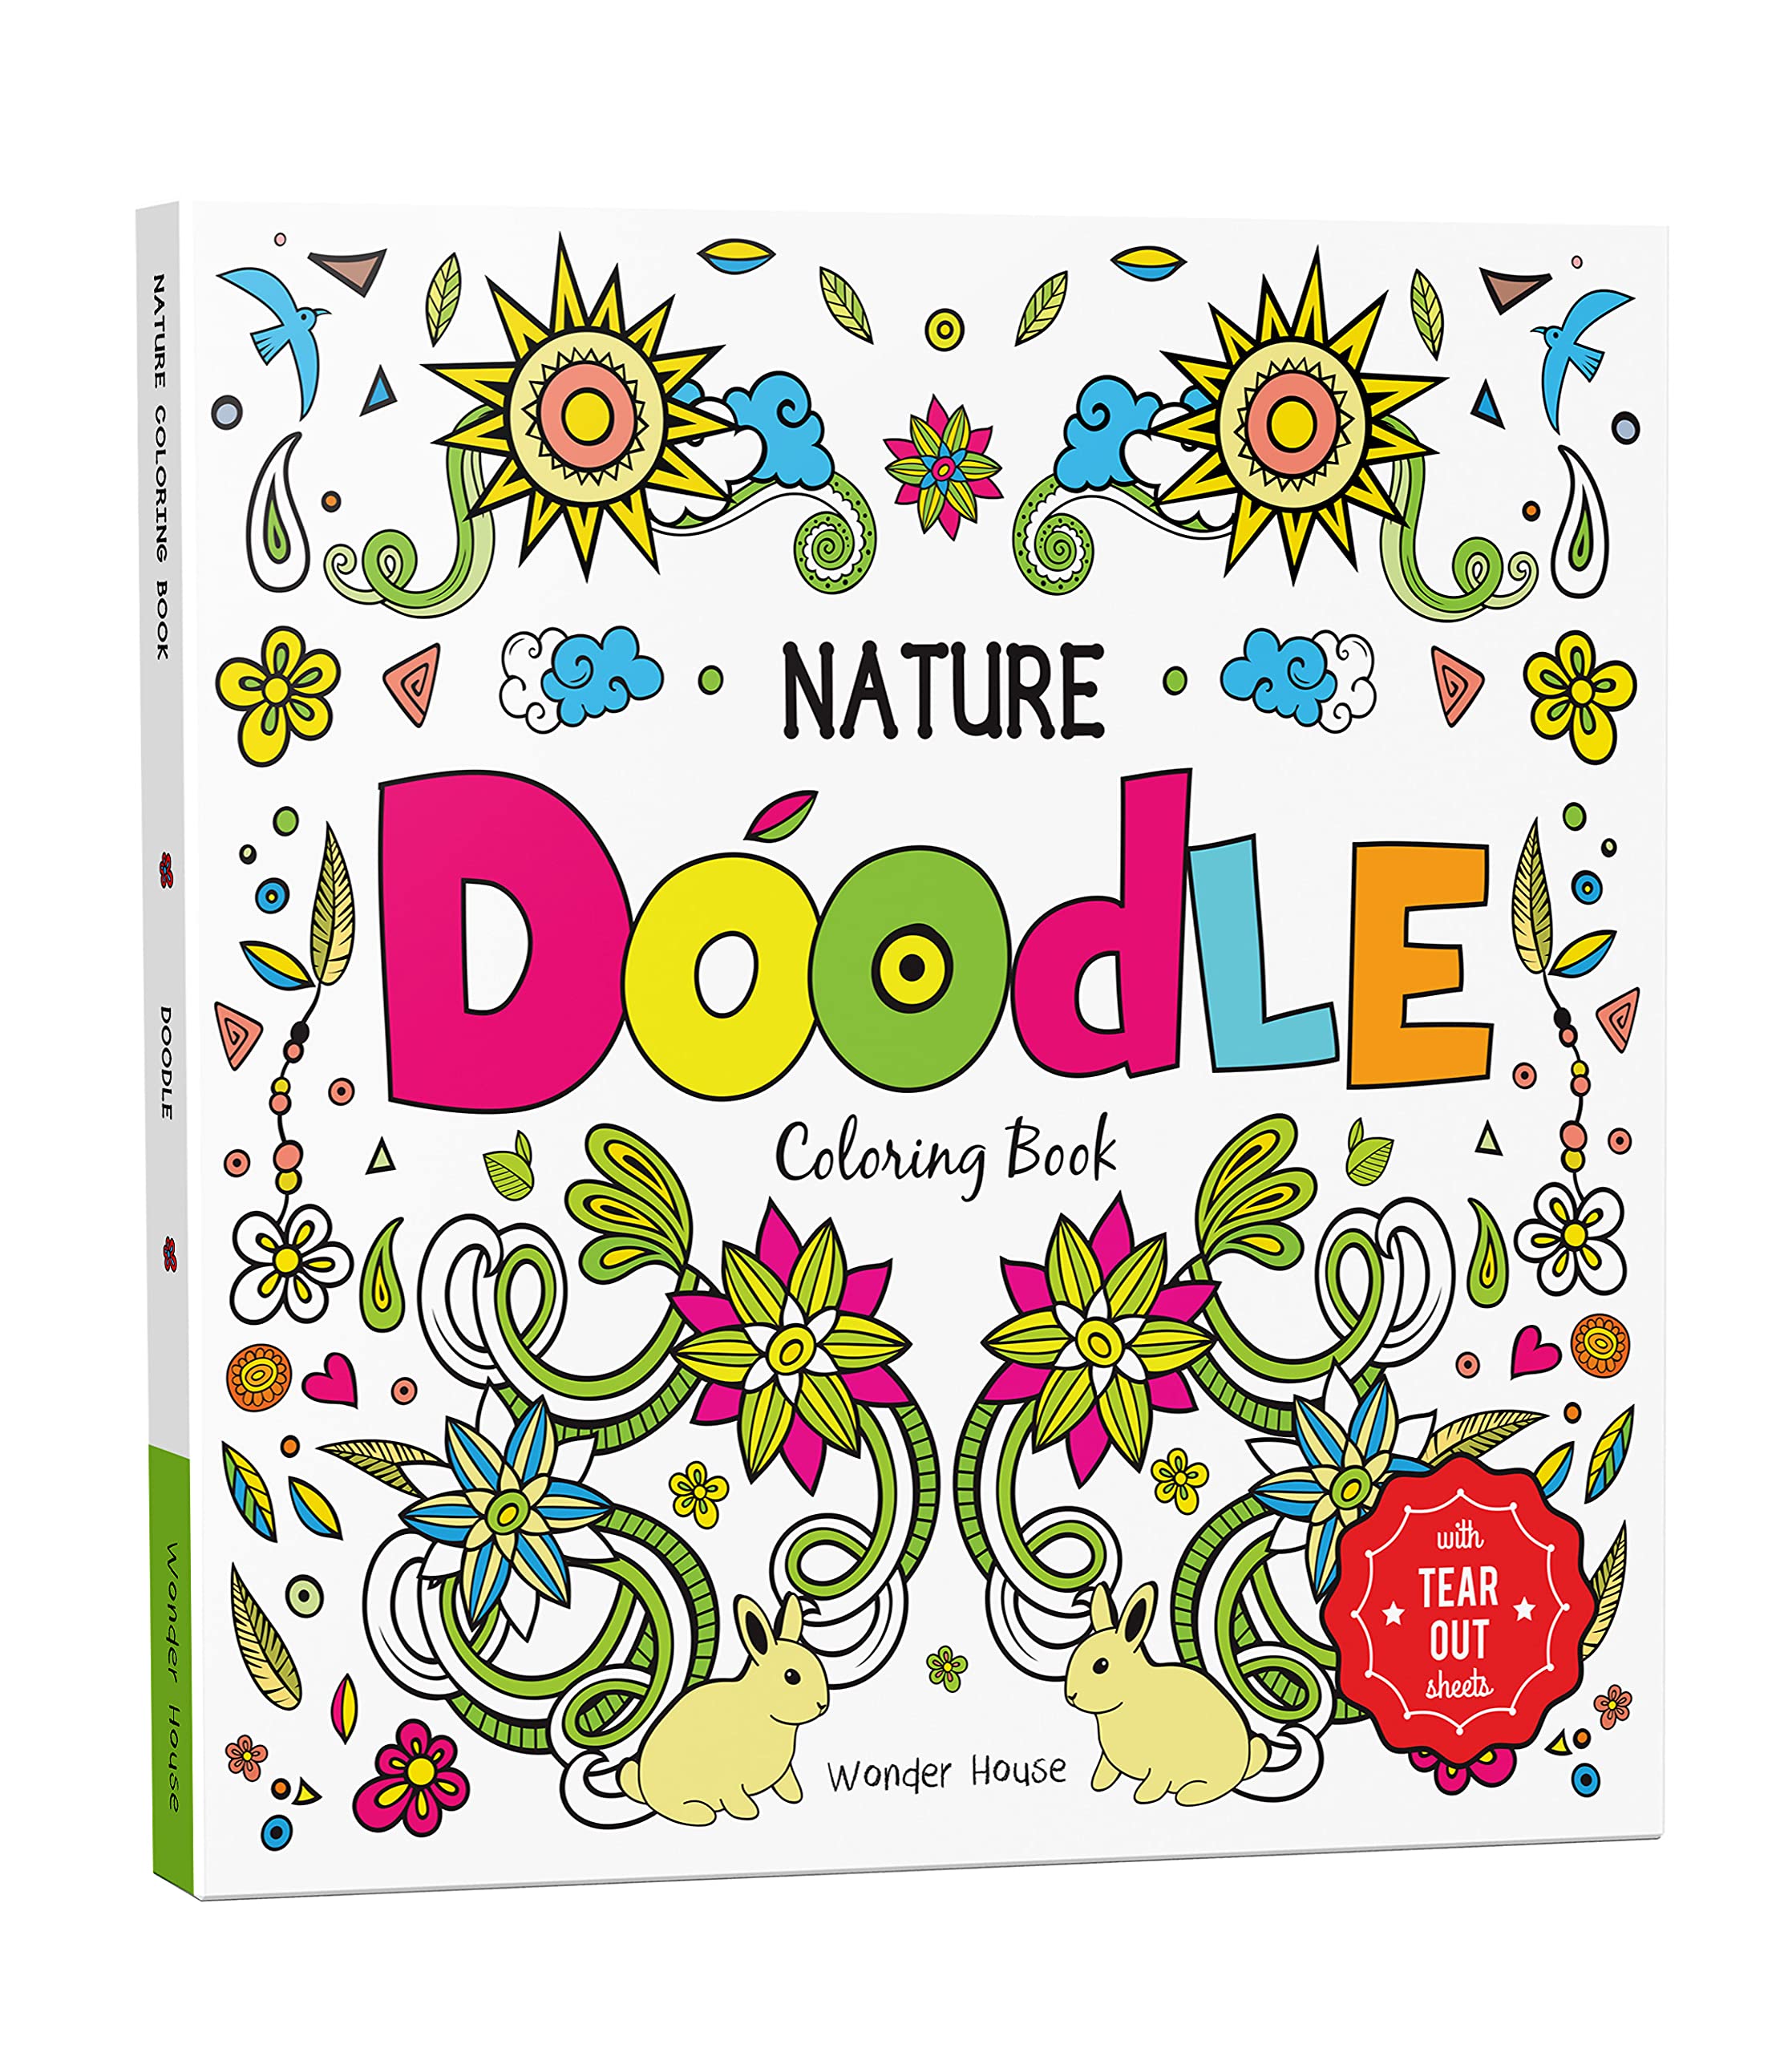 Nature Doodle : Tear Out Sheets Coloring Book